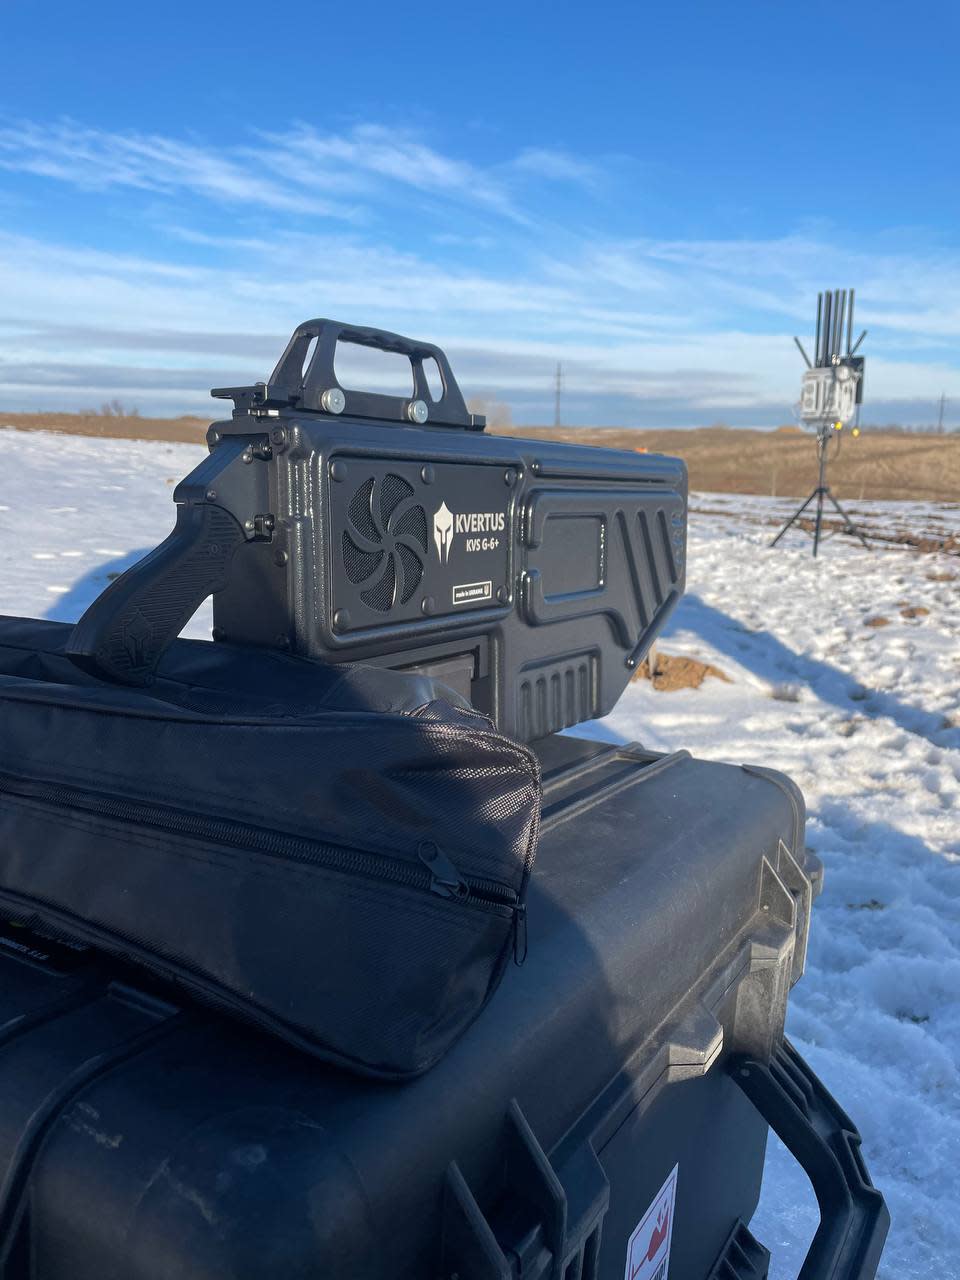 A portable anti-drone gun, used mainly against reconnaissance drones, such as Mavic, Autel, the Russian Orlan-10. The radius of suppression of UAV is 1-3 kilometers, depending on the configuration. (Photo provided by Kvertus)